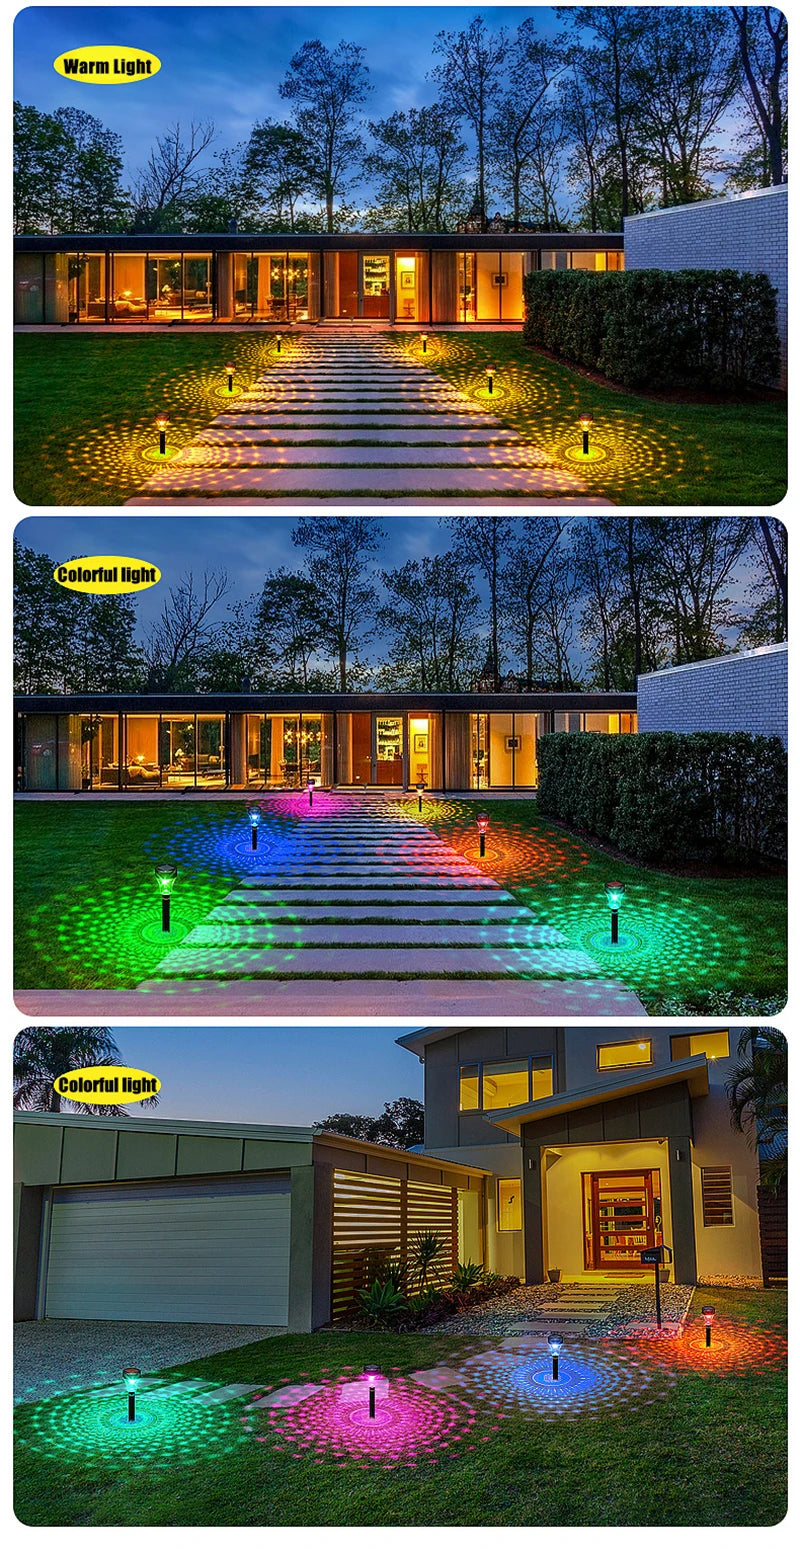 LED Lawn Solar Light, Bright LED lights emit warm color tones in a multicolor display.